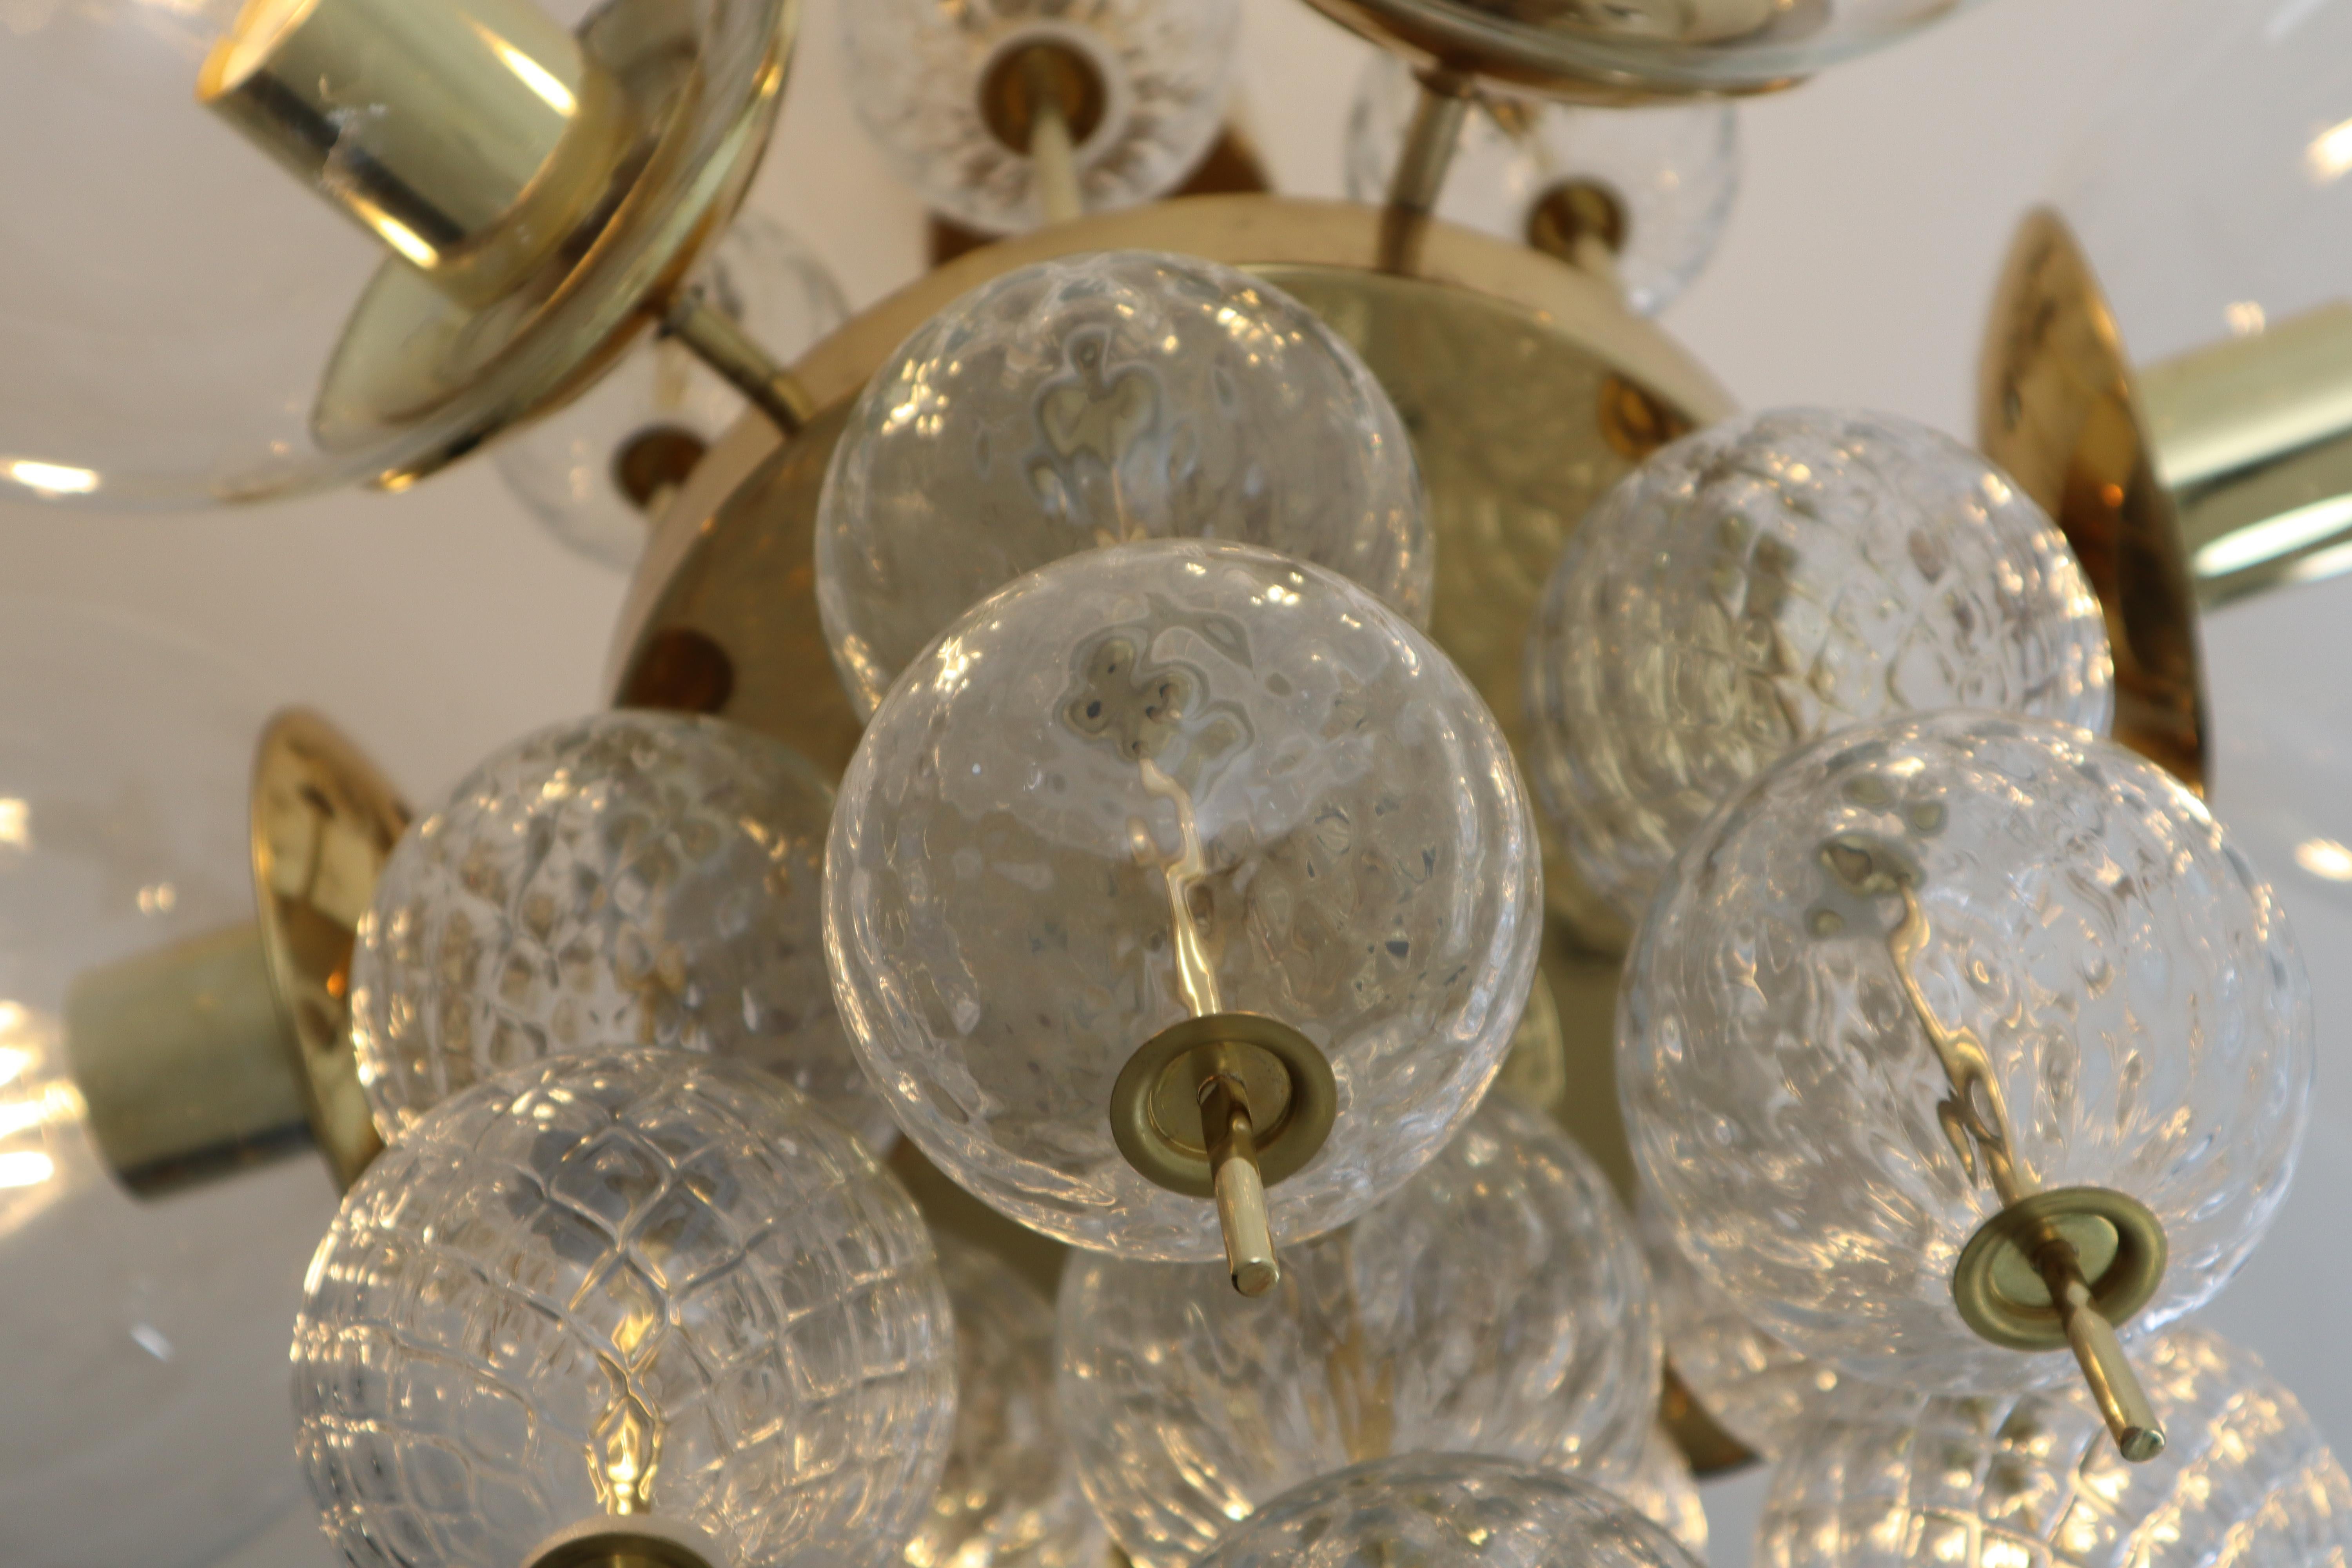 European Midcentury Chandeliers with Brass Fixture and Hand-Blown Glass, Europe 1970s For Sale